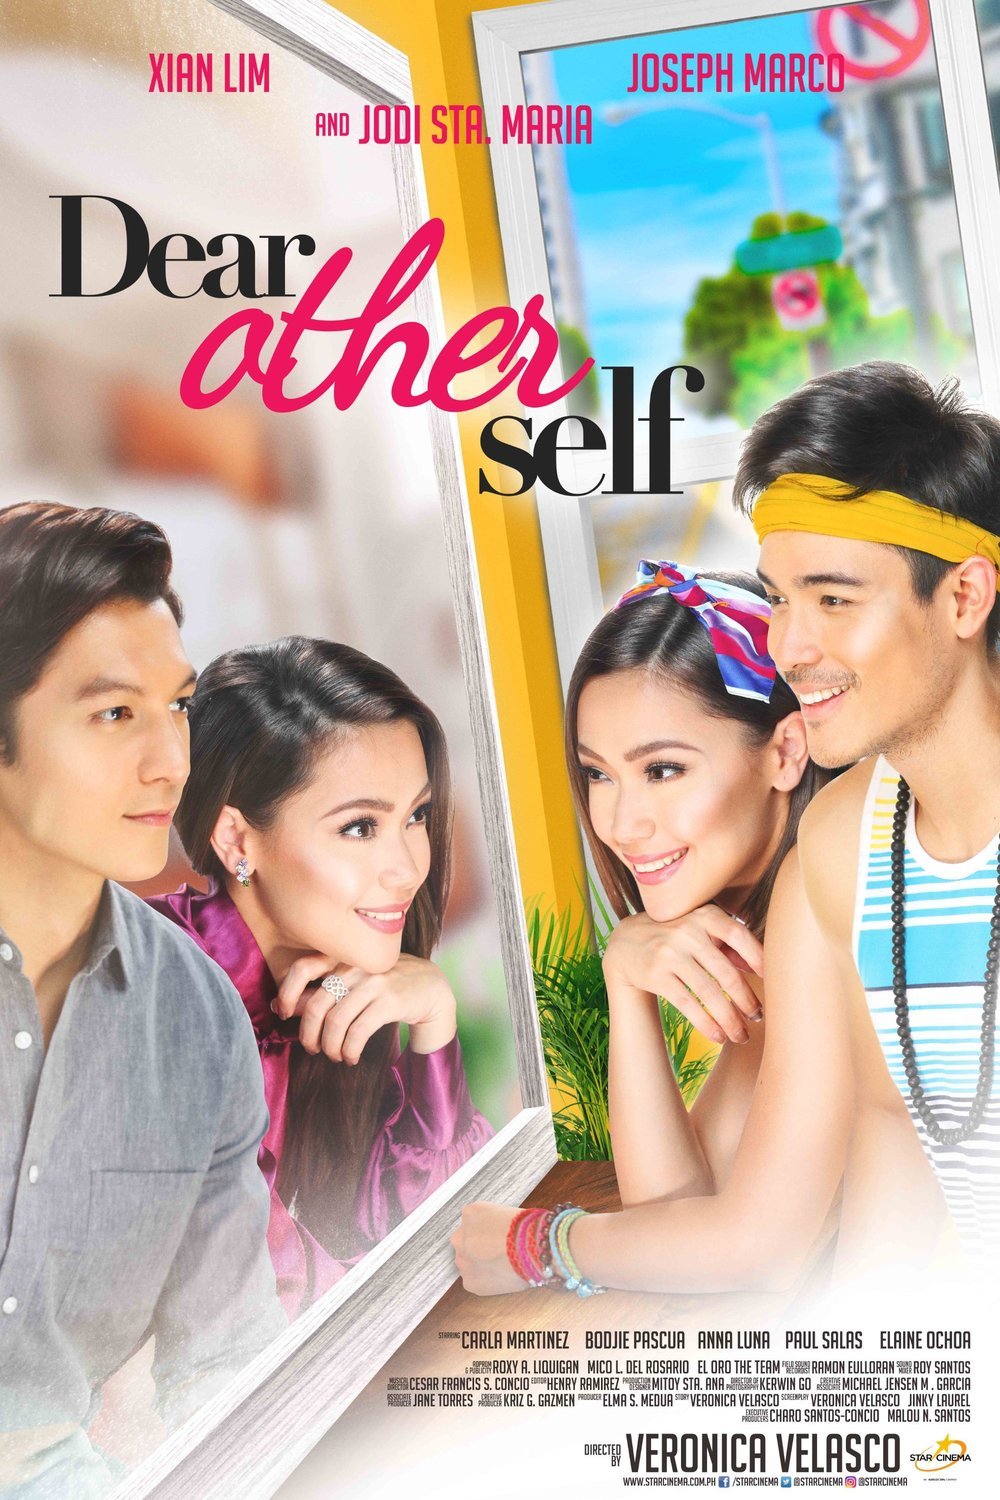 Poster of the movie Dear Other Self